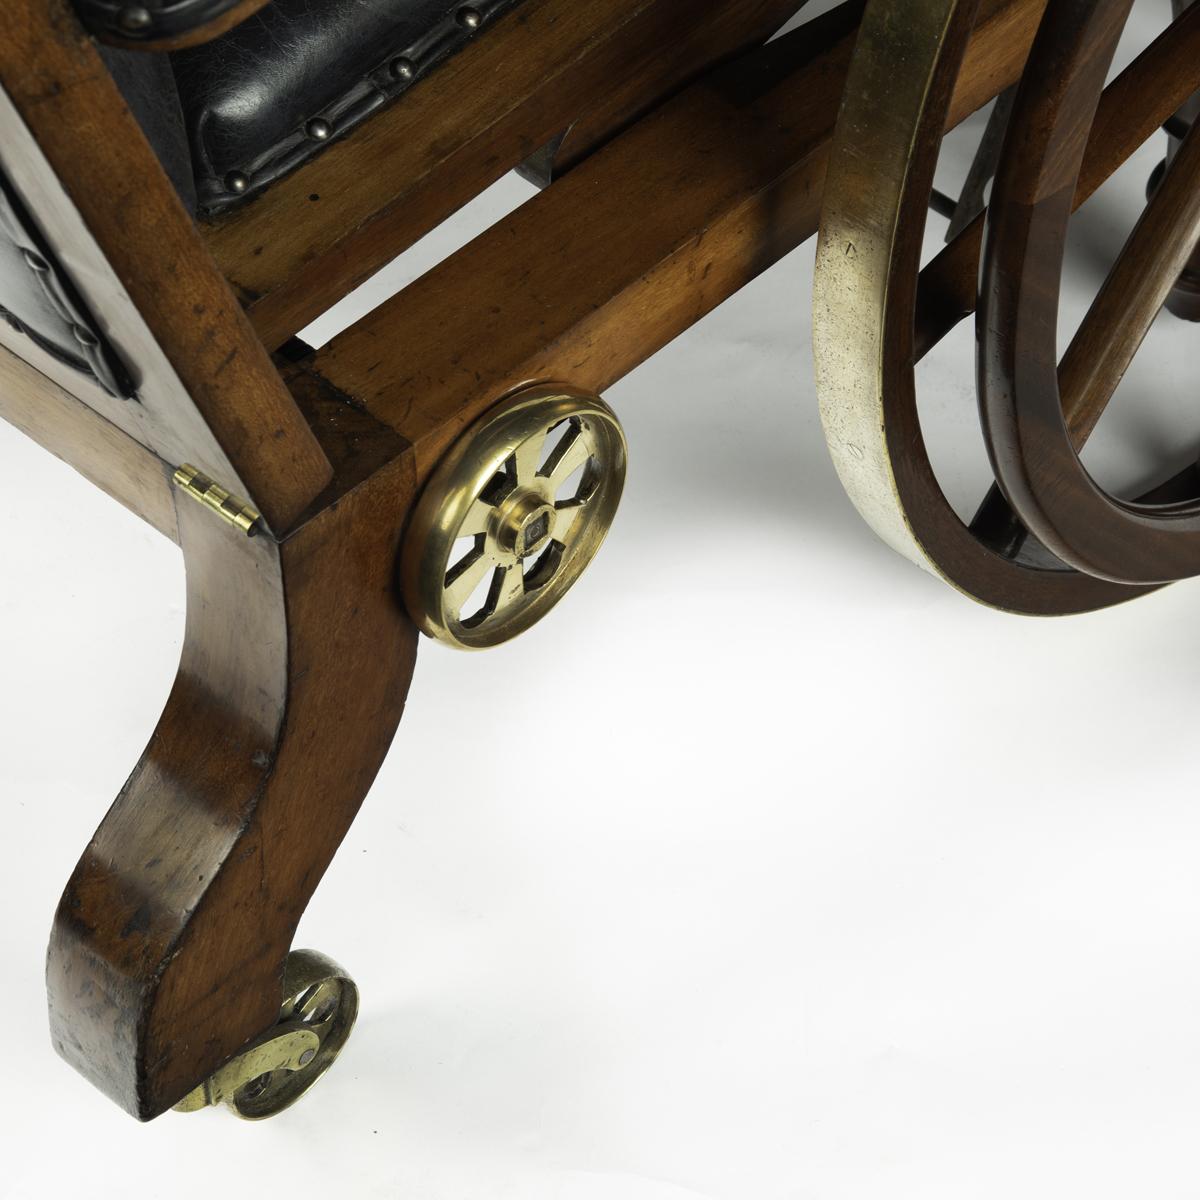 A patented mechanical campaign invalid chair by Chapman